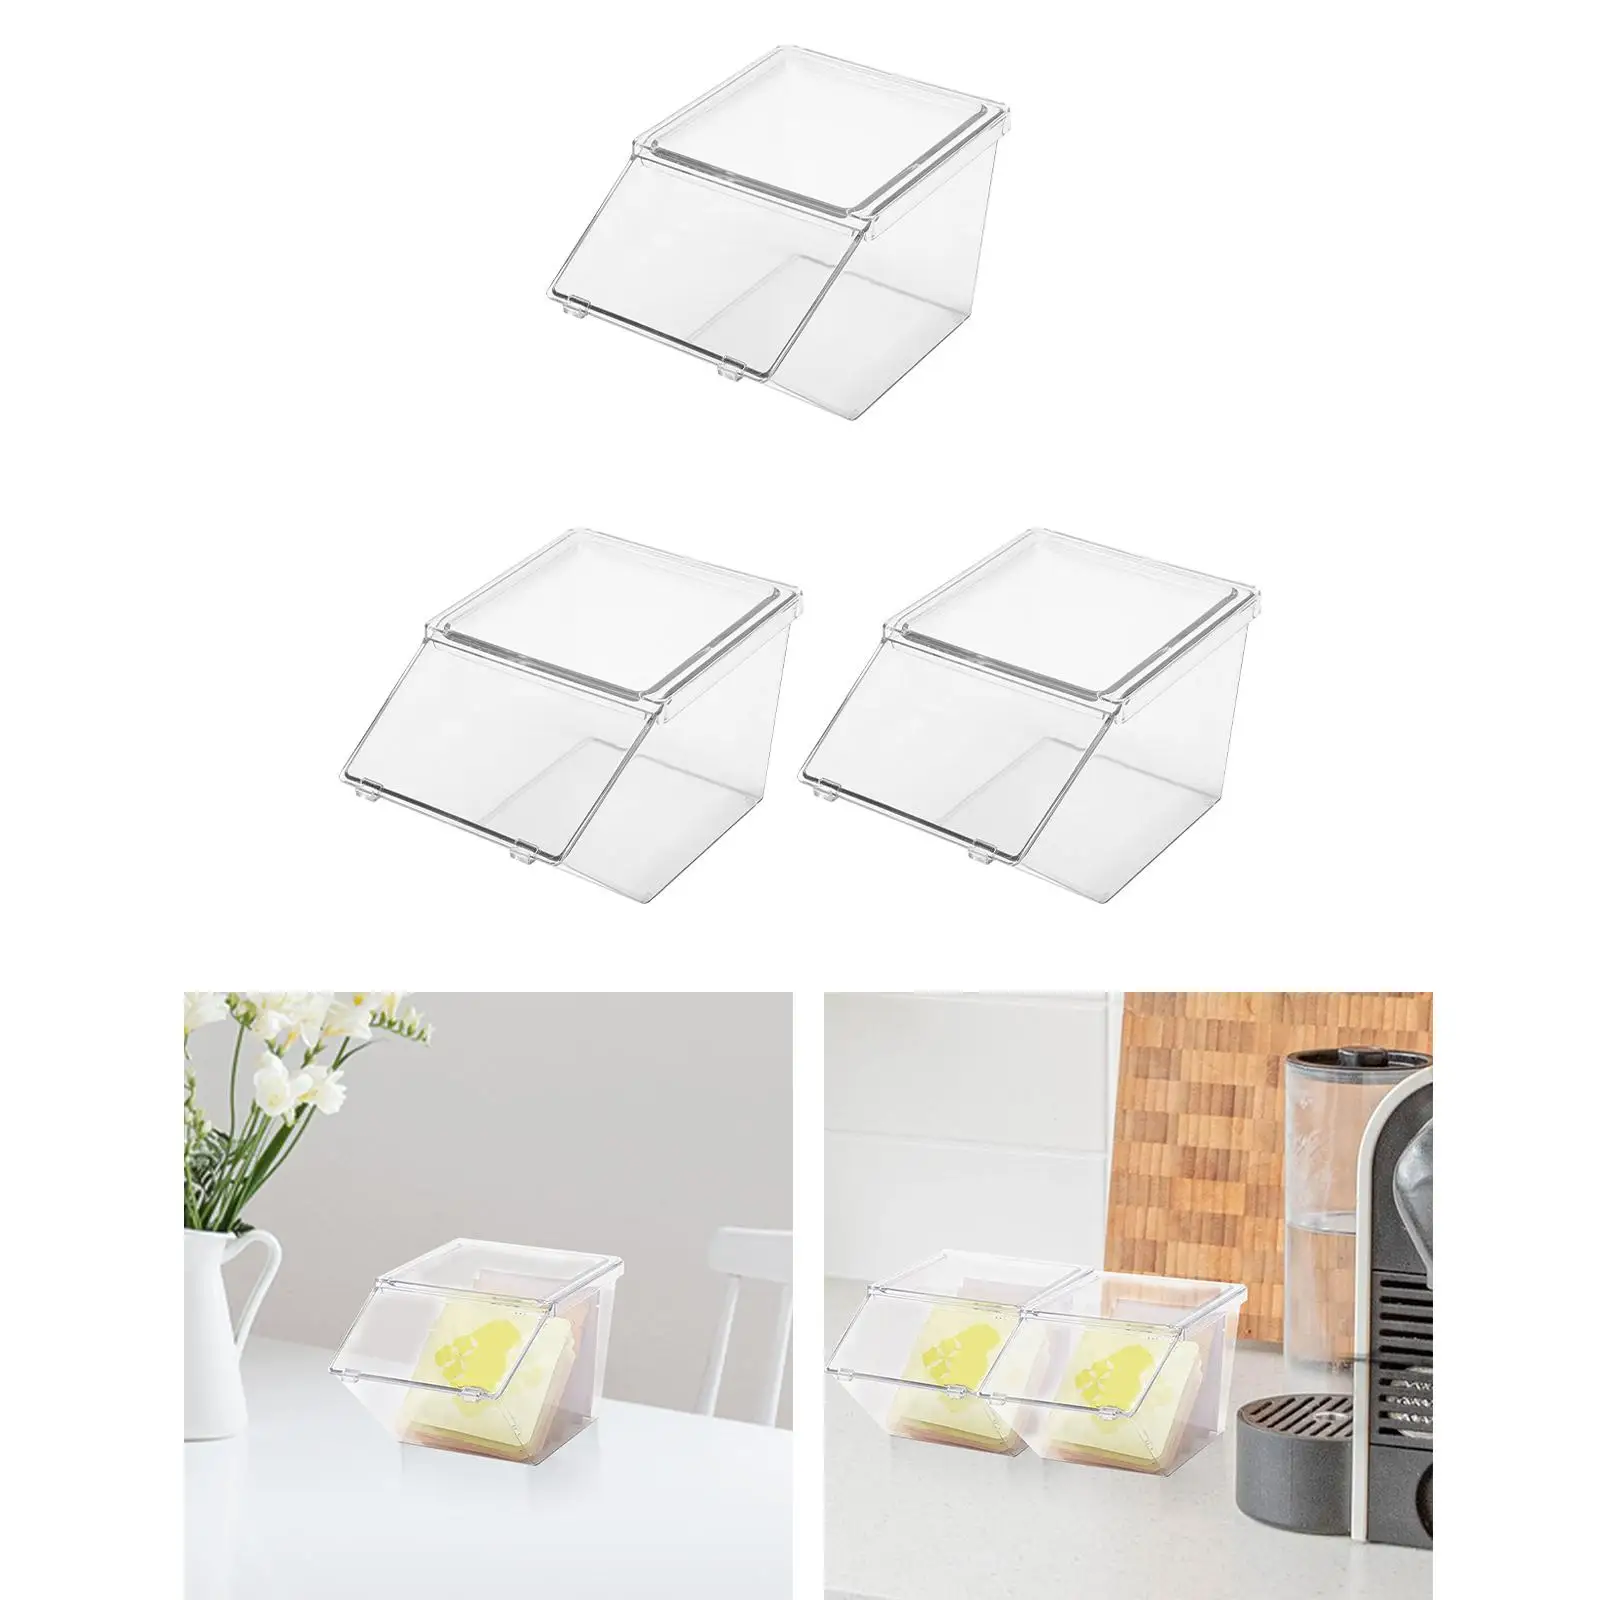 Tea Bags Organizer Multifunctional Large Capacity Coffee Snack Holder Rack for Bedroom Office Cabinets Kitchen Sugar Packets